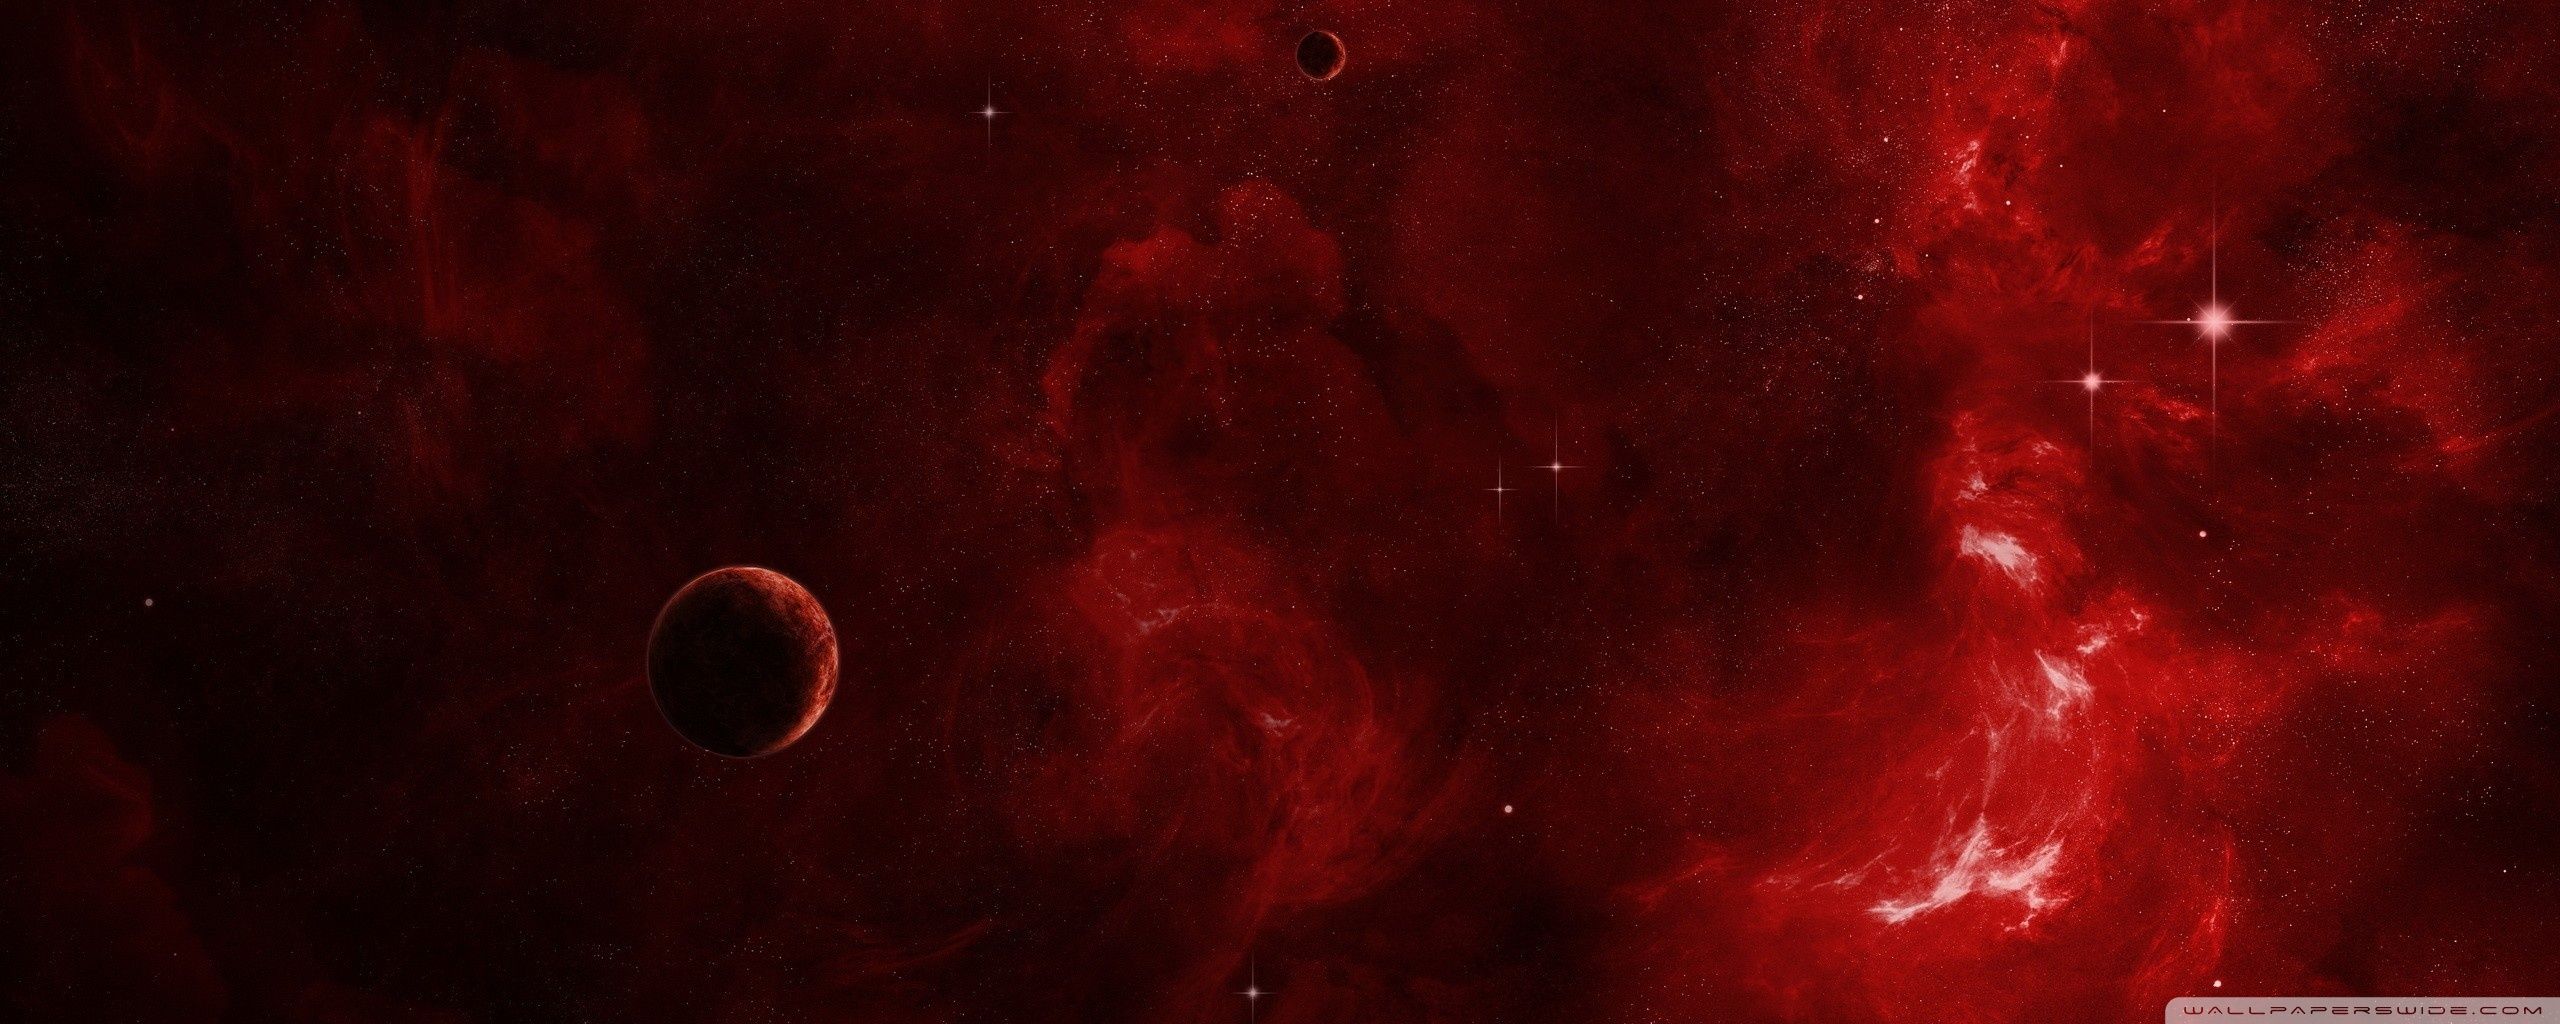 A red background with stars and planets - Red, dark red